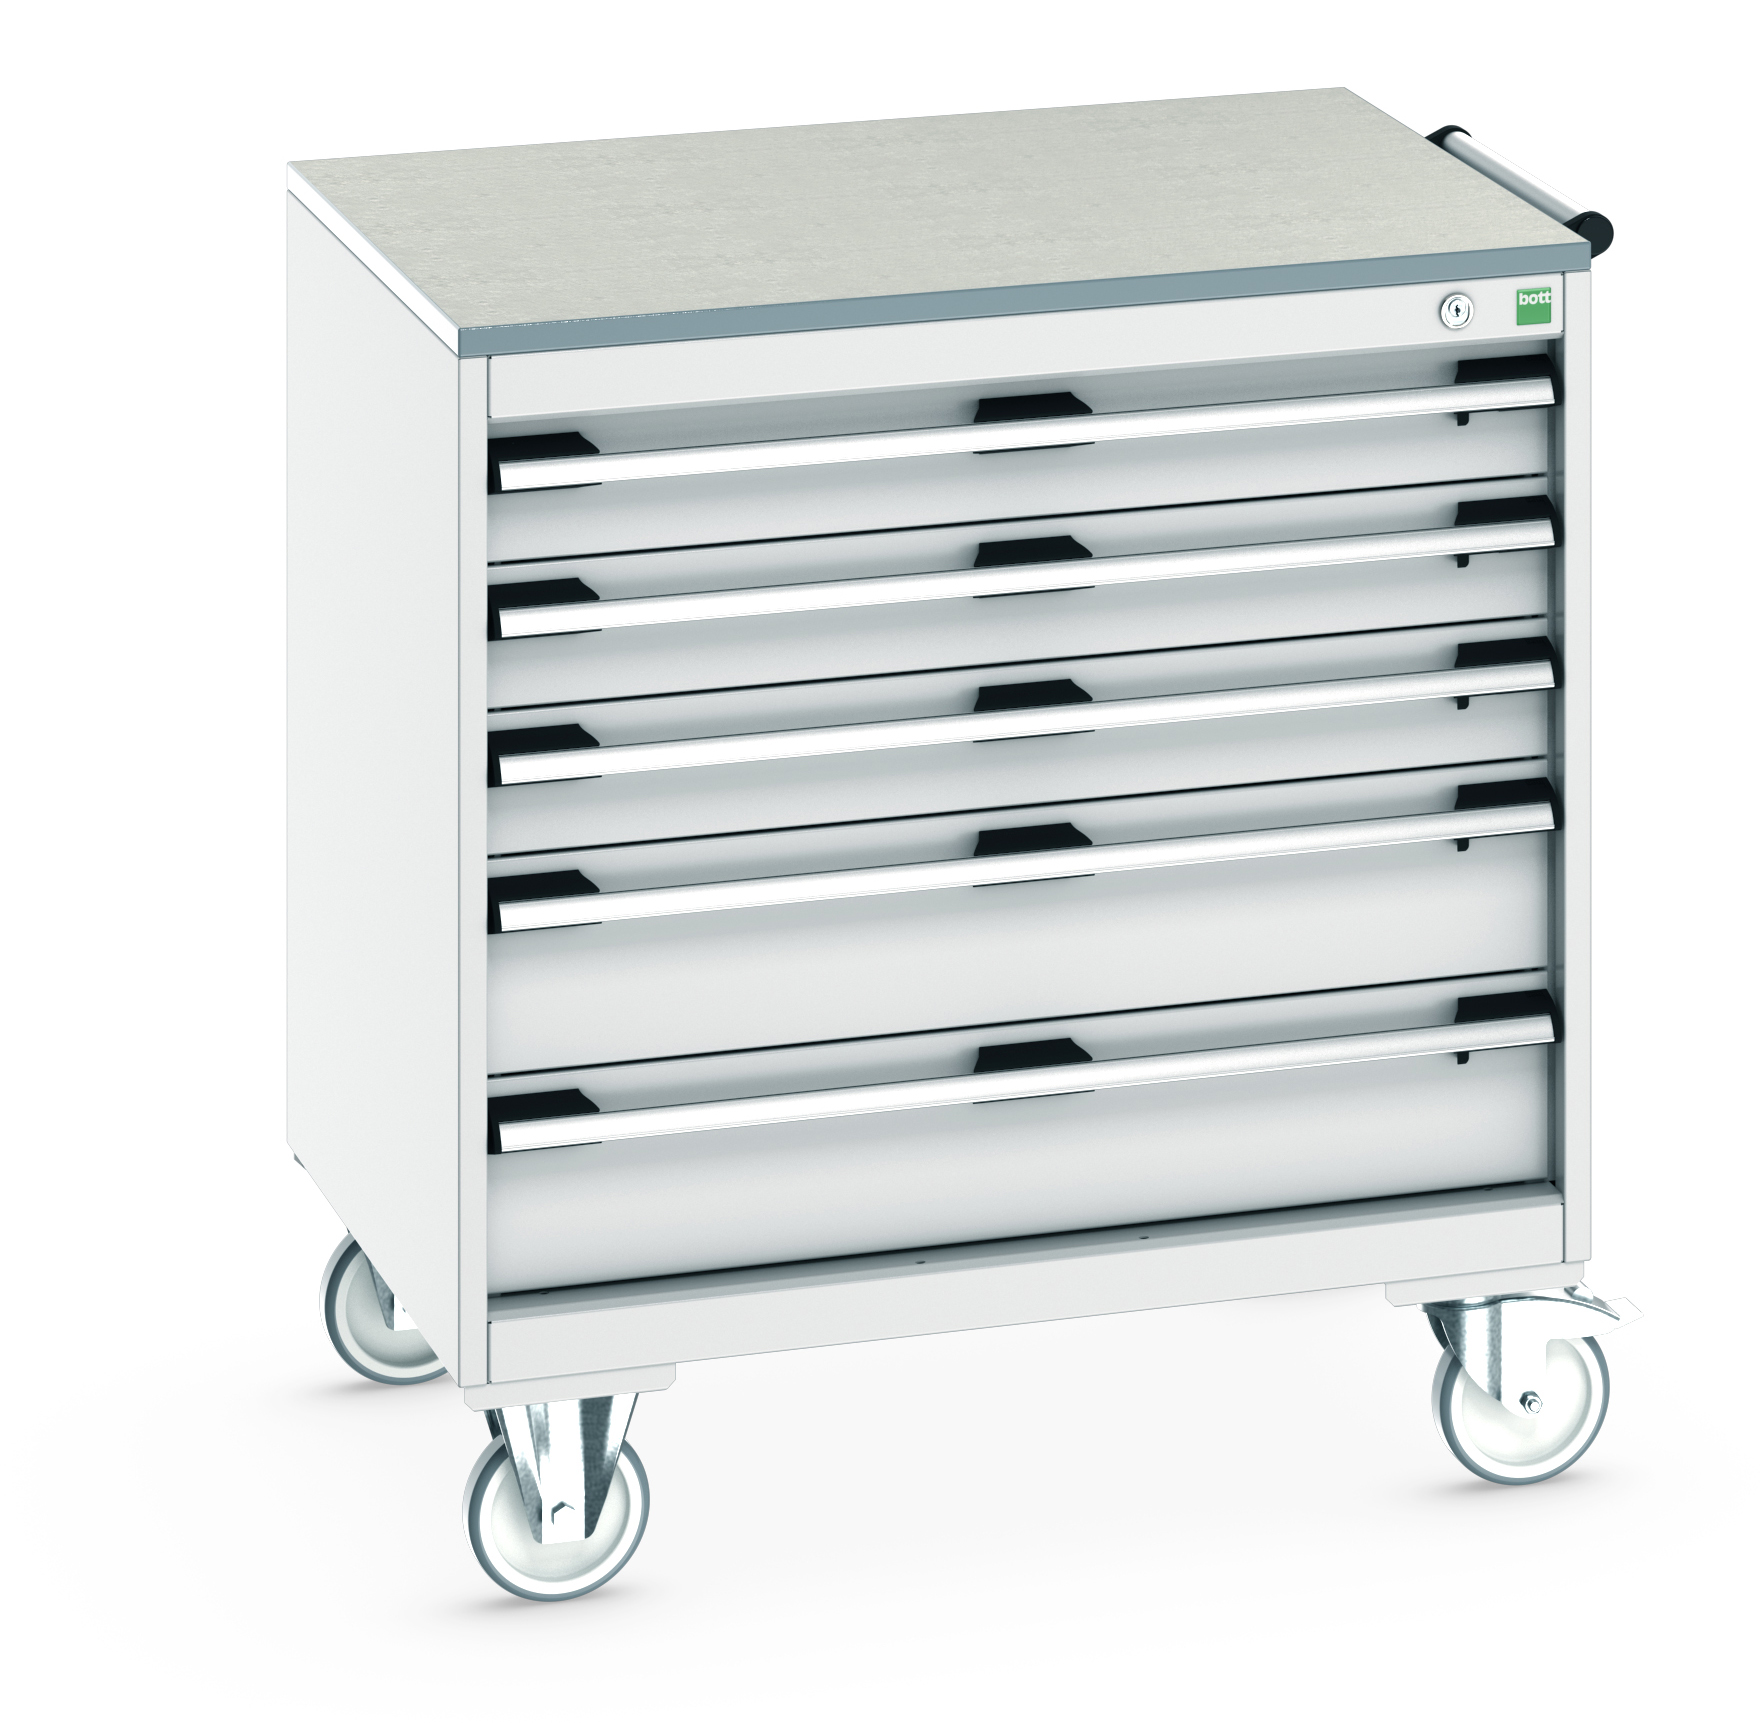 Bott Cubio Mobile Drawer Cabinet With 5 Drawers & Lino Worktop - 40402156.16V